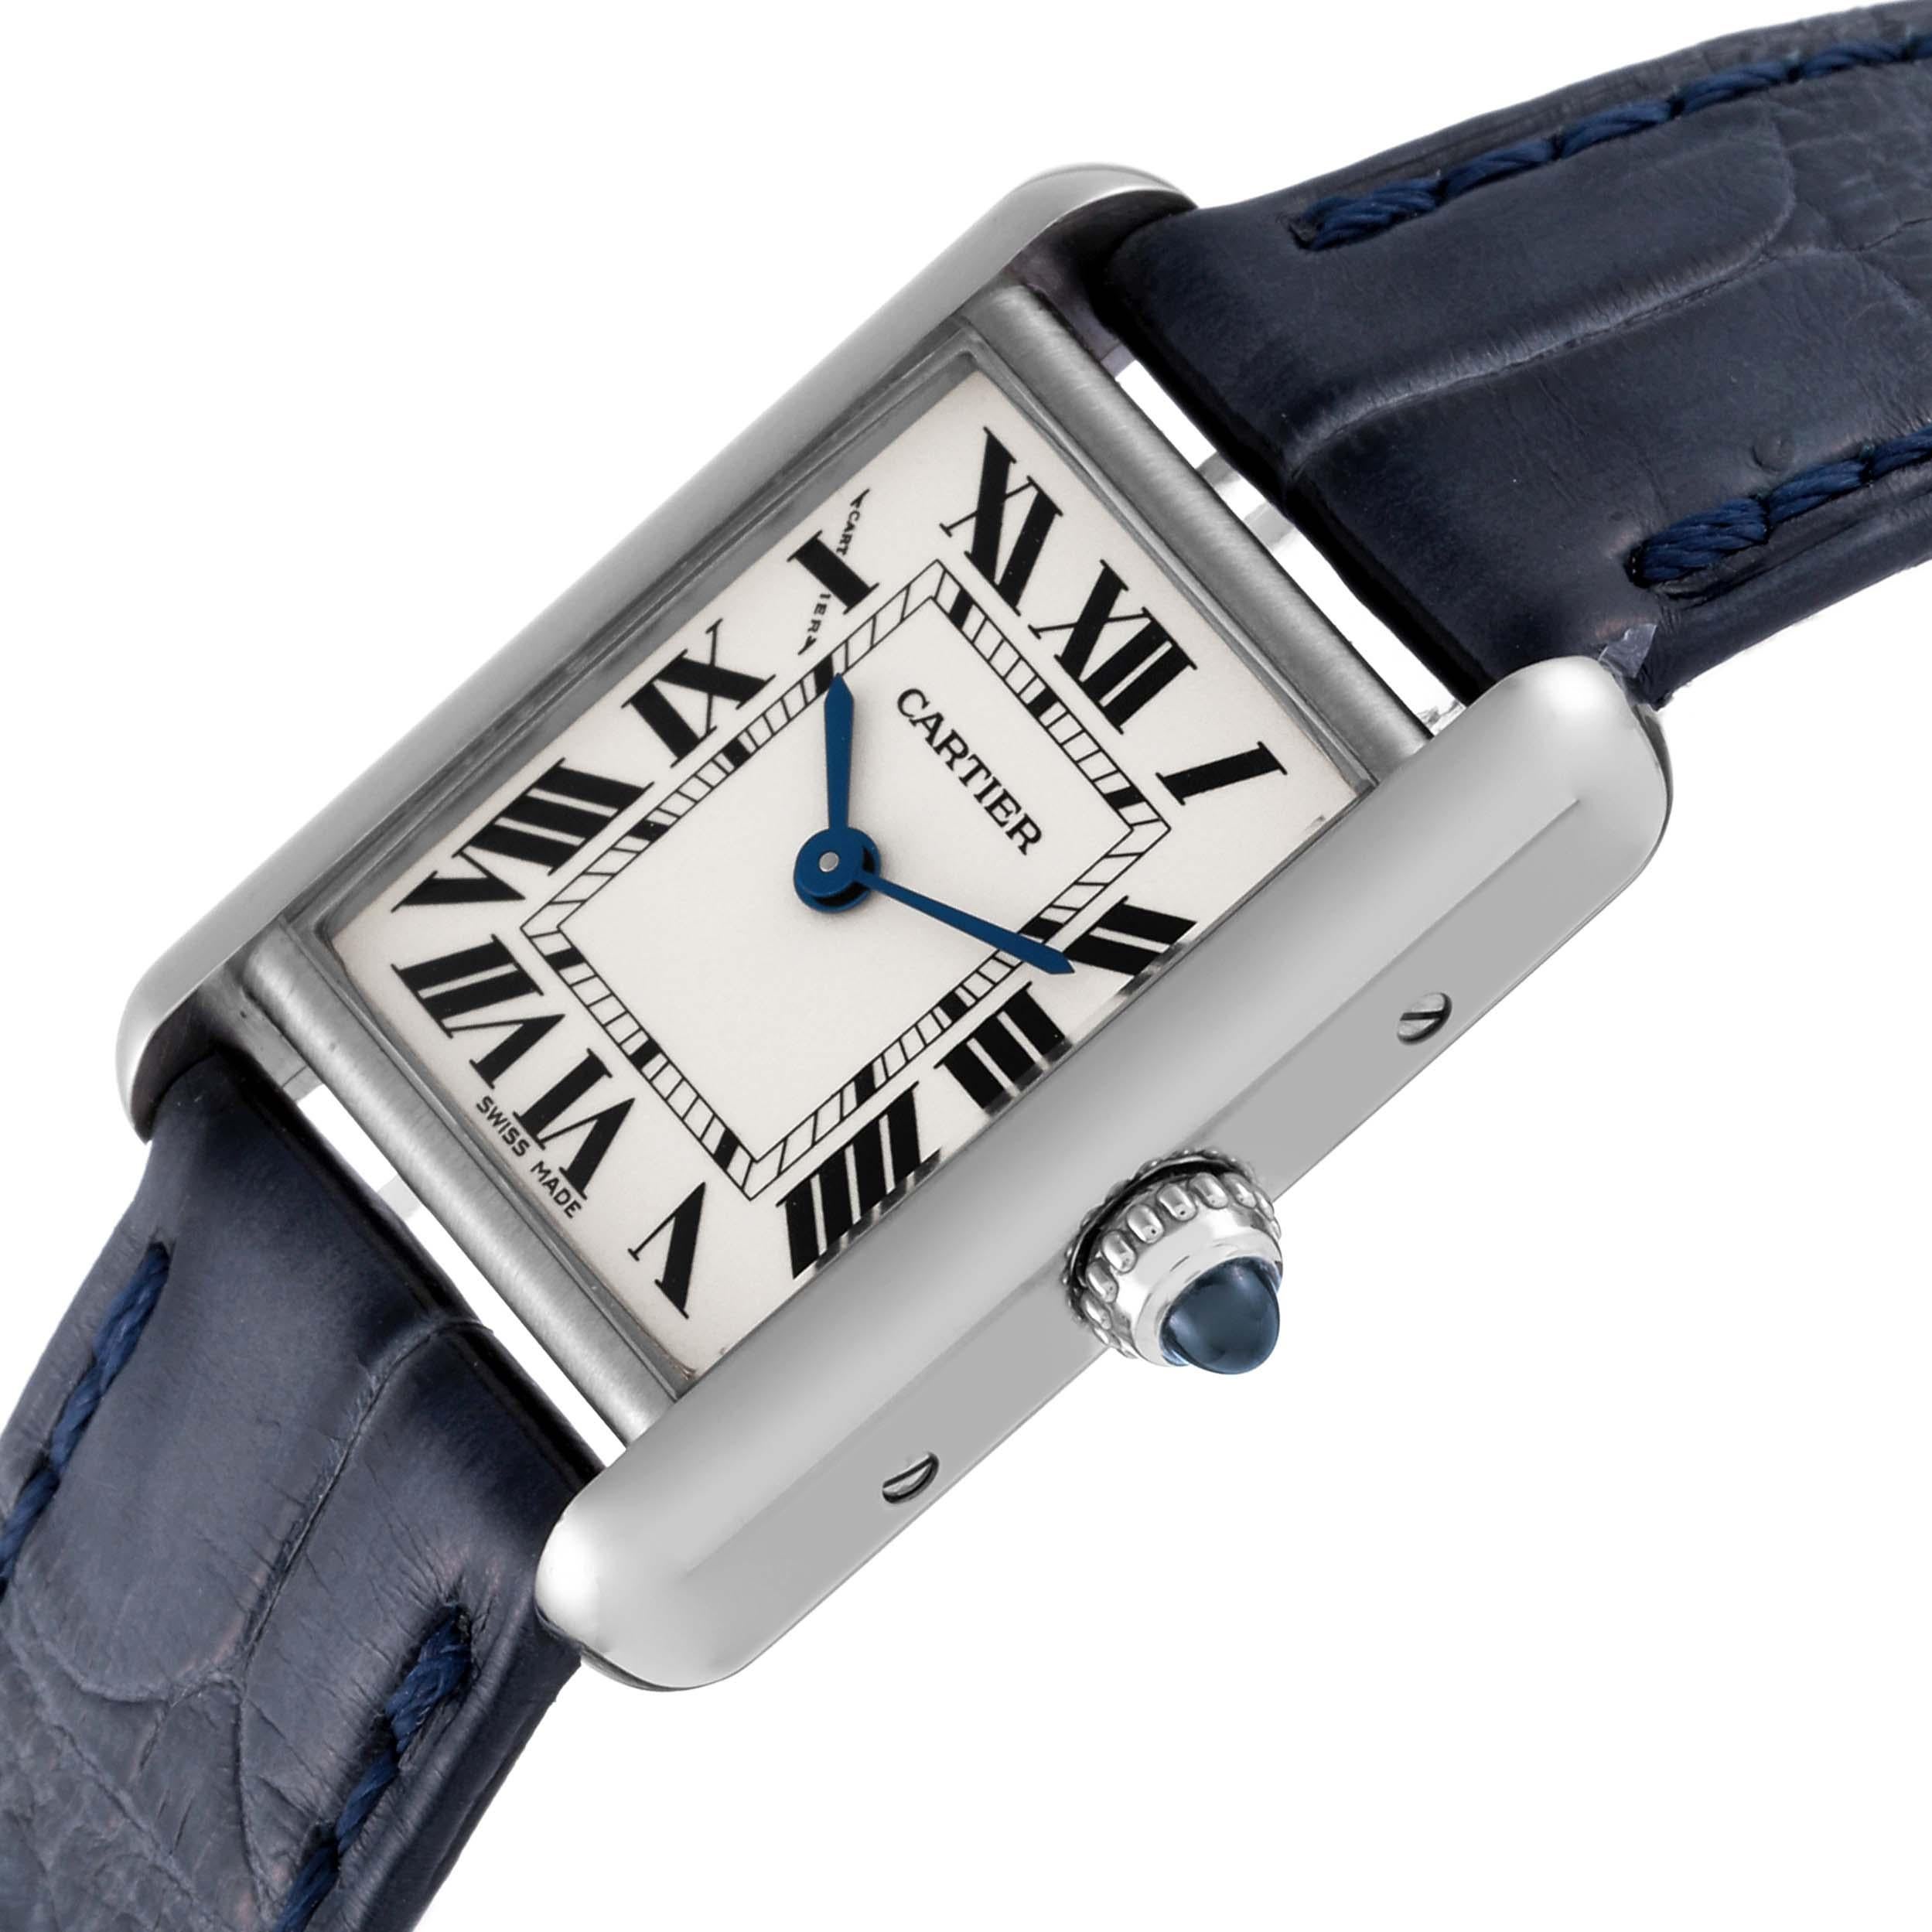 Cartier Tank Louis White Gold Blue Strap Ladies Watch W1541056. Quartz movement. 18K white gold case 22 mm x 29 mm. Circular grained crown set with a blue sapphire cabochon. . Scratch resistant mineral crystal. Silver grained dial with black Roman